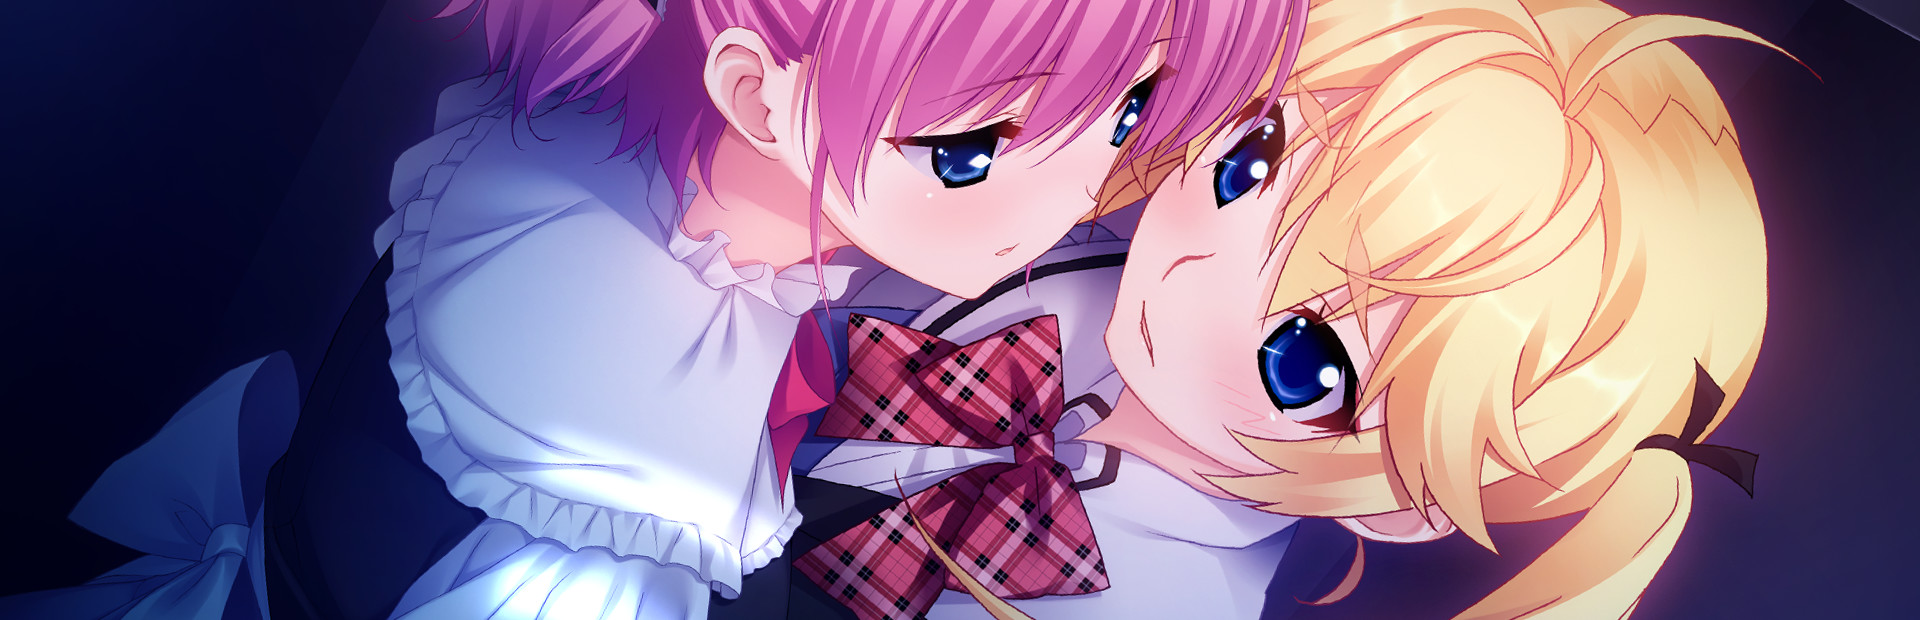 The Leisure of Grisaia cover image